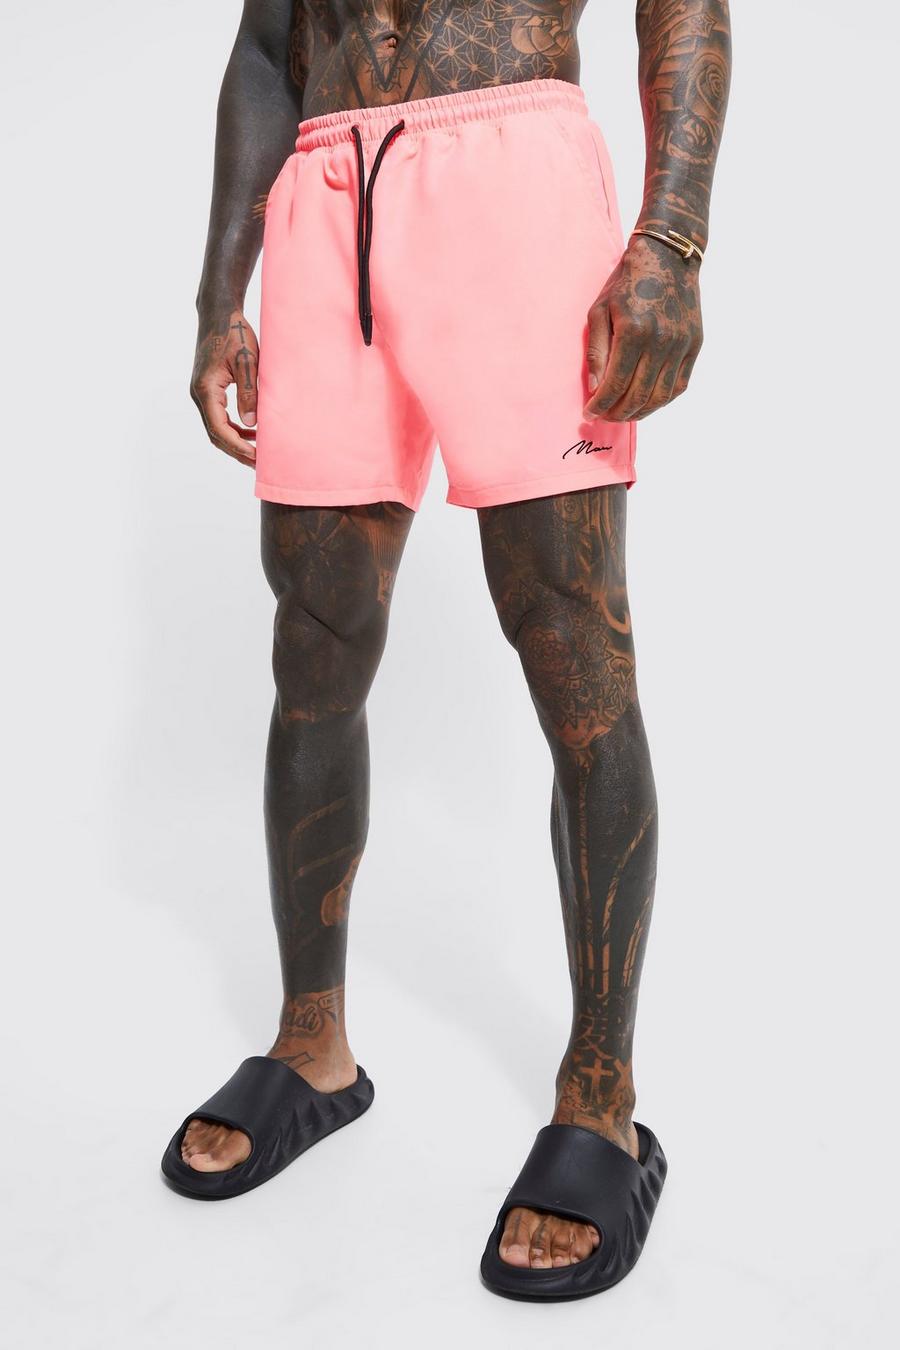 Costume a pantaloncino medio con firma Man, Neon-pink image number 1